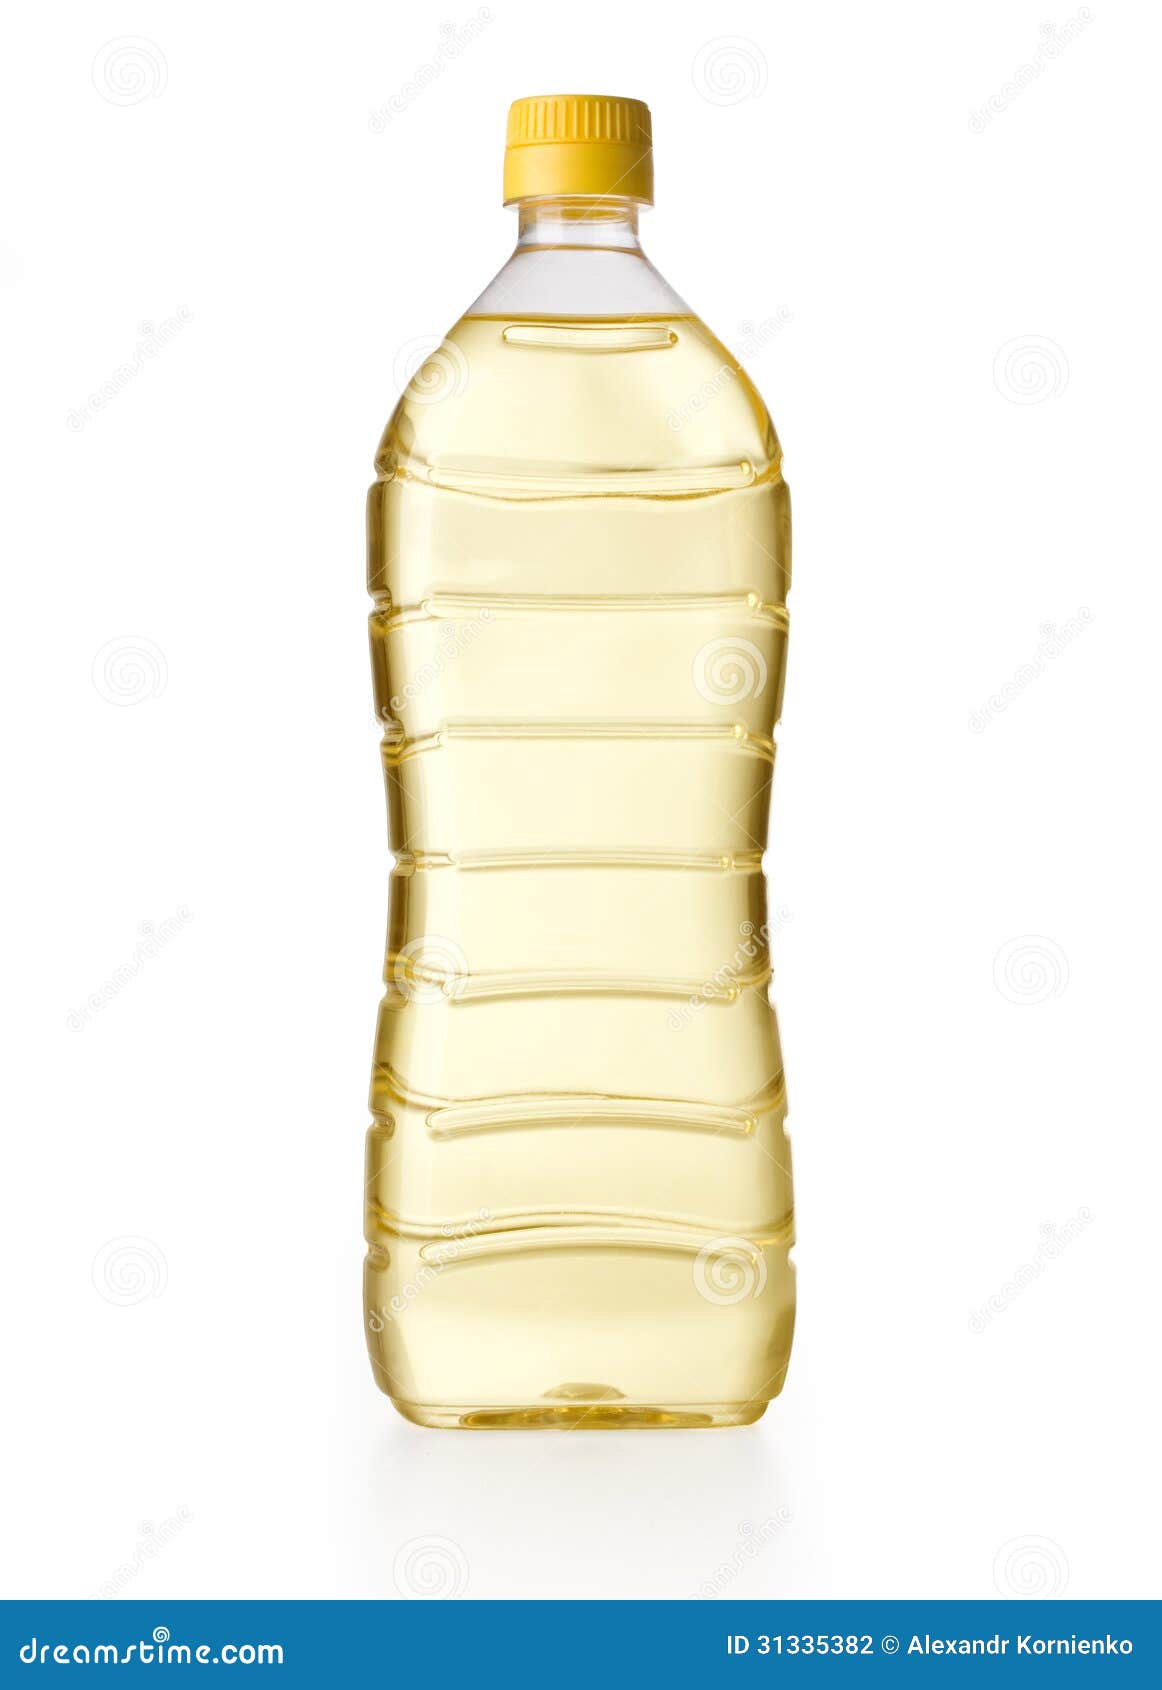 cooking-oil-bottle-isolated-white-clipping-path-31335382.jpg